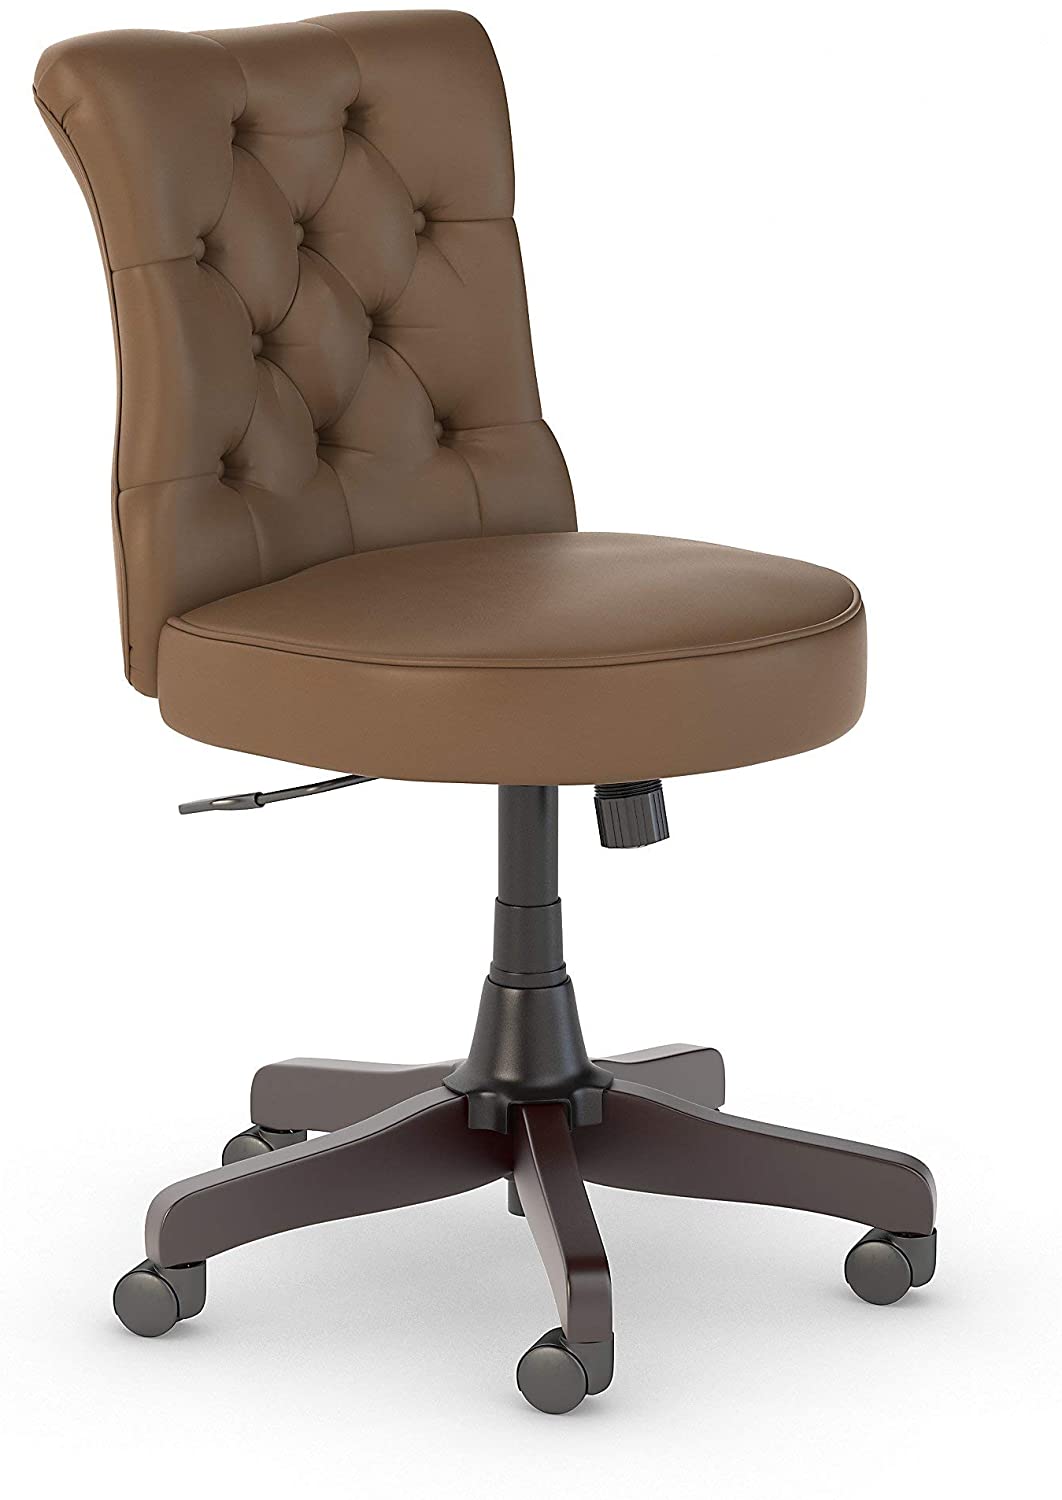 Bush Business Furniture Arden Lane Mid Back Tufted Office Chair, Saddle Tan Leather